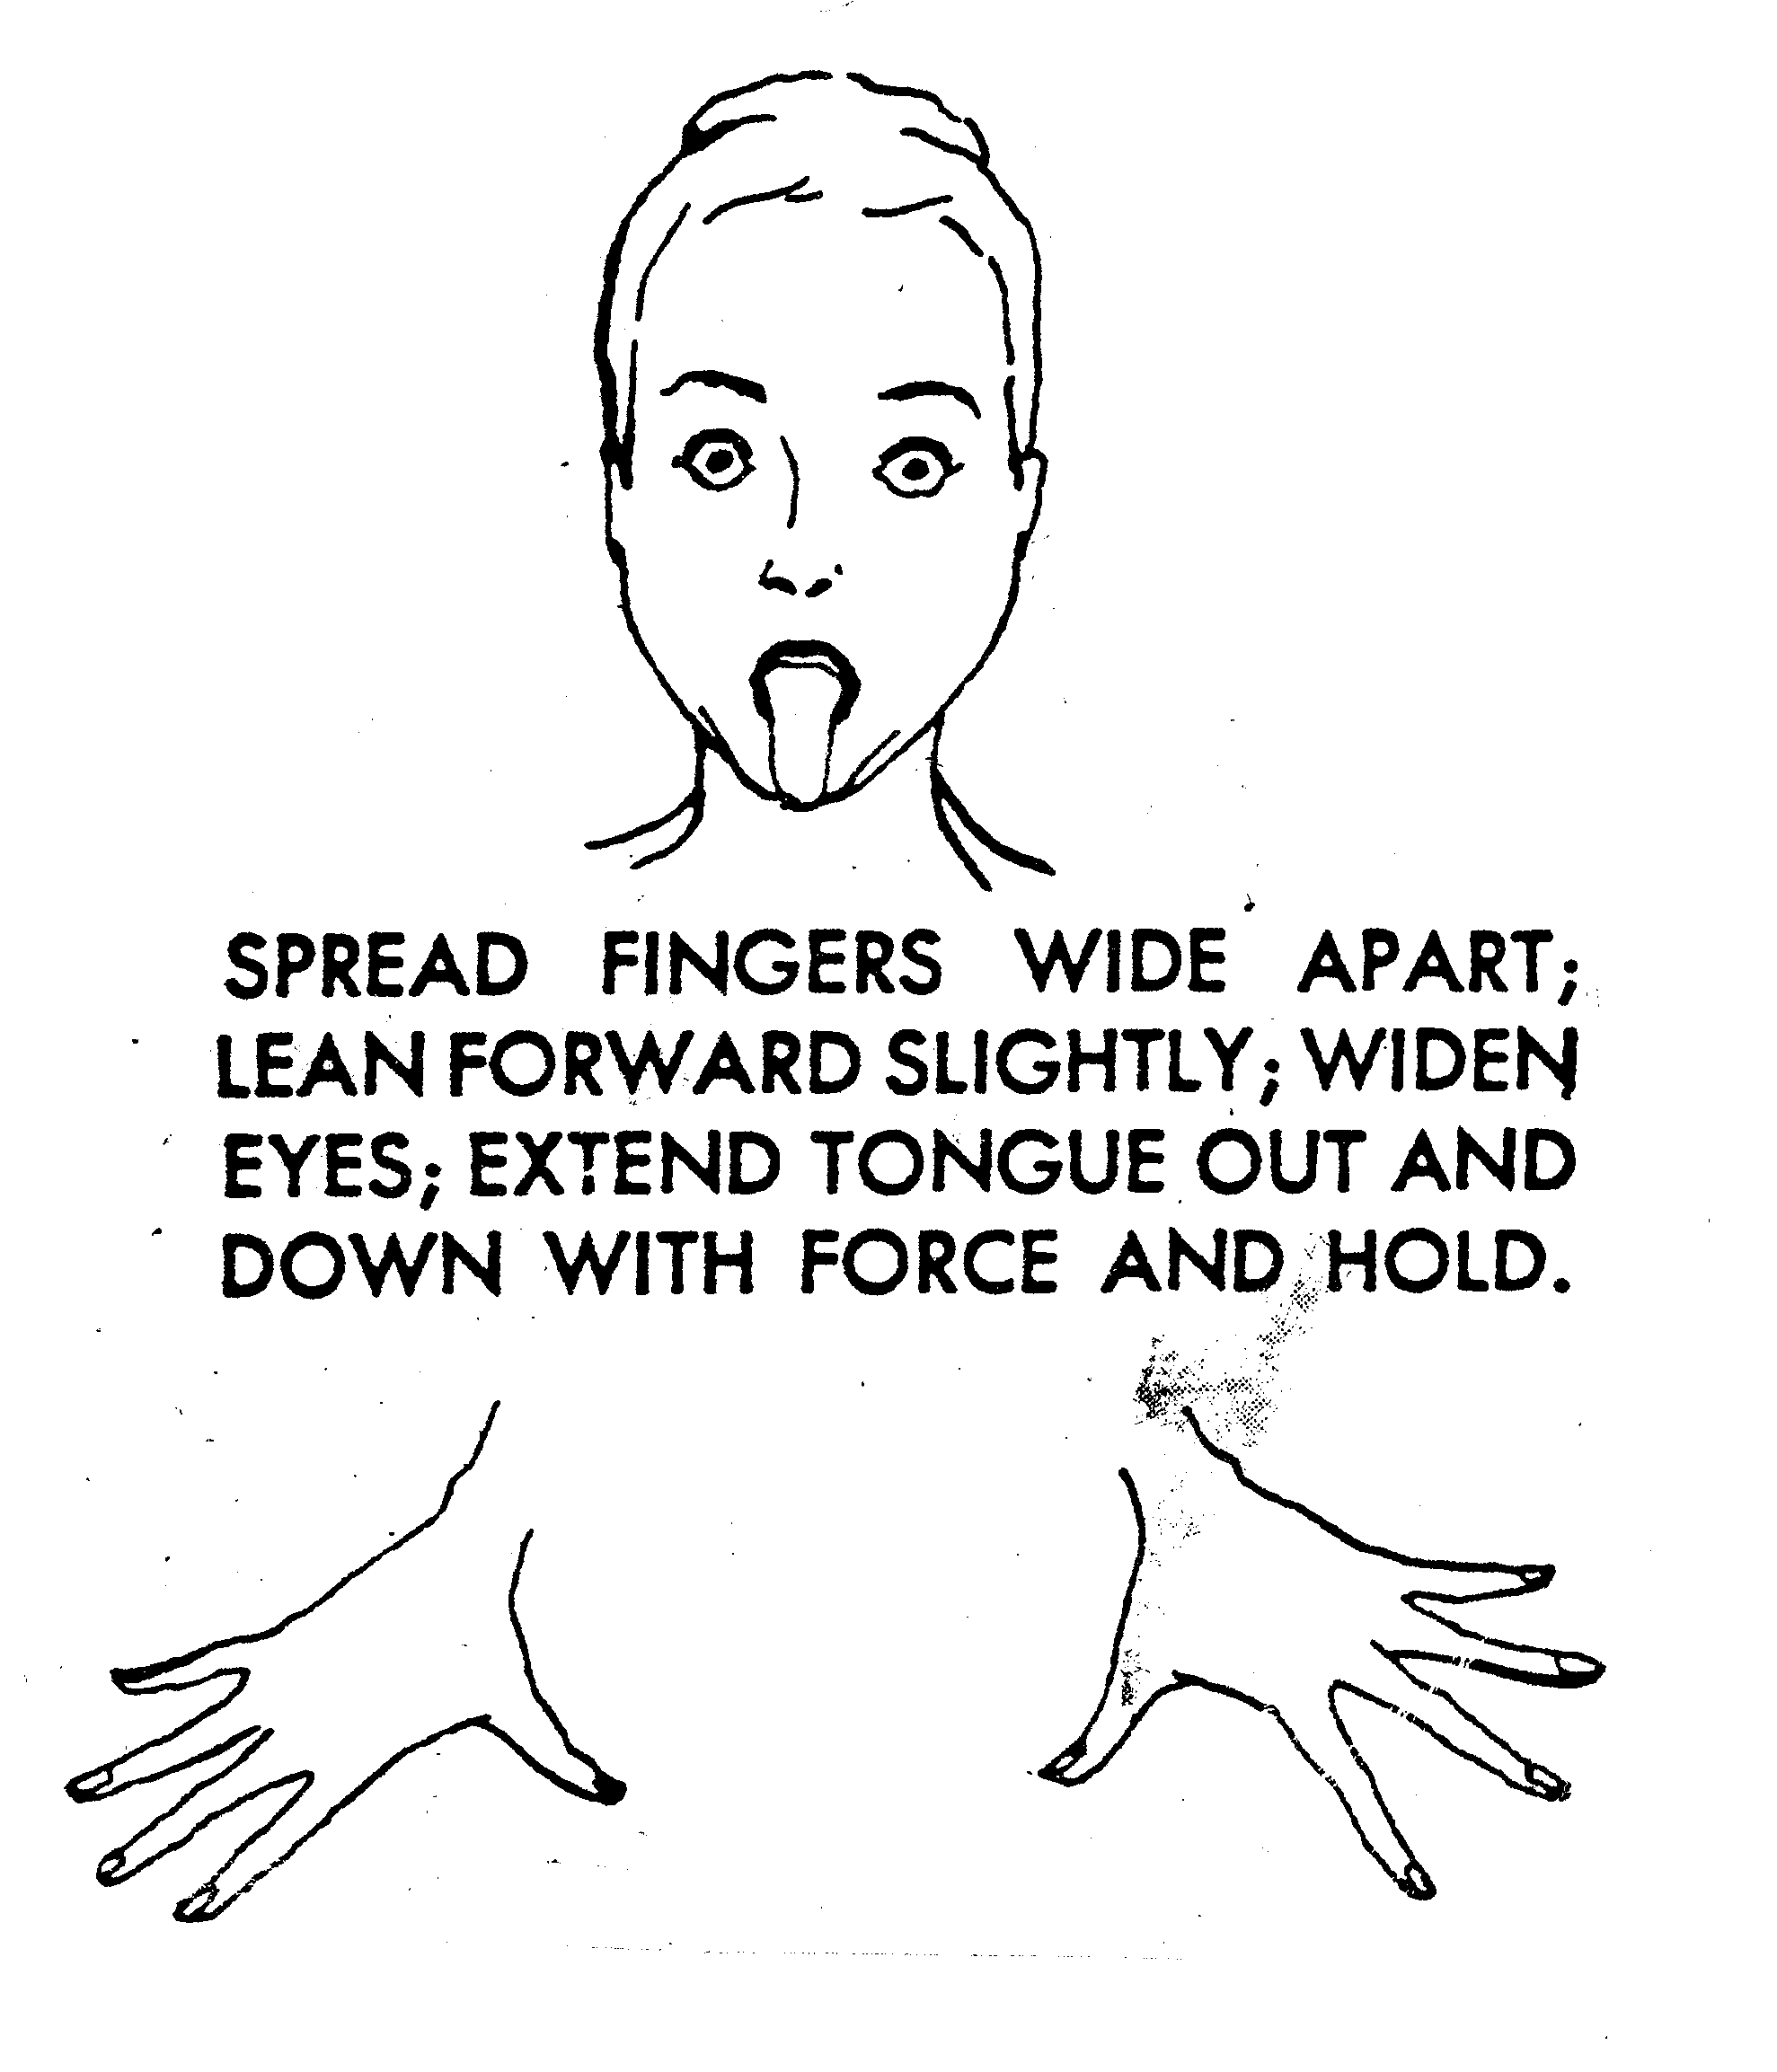 Found imagery - Photocopied black & white diagram of a woman with her tongue out and fingers outstretched. Possibly from a yoga manual.Contains the words "Spread fingers wide apart, lean forward slightly, widen eyes, extend tongue out and down with force and hold"